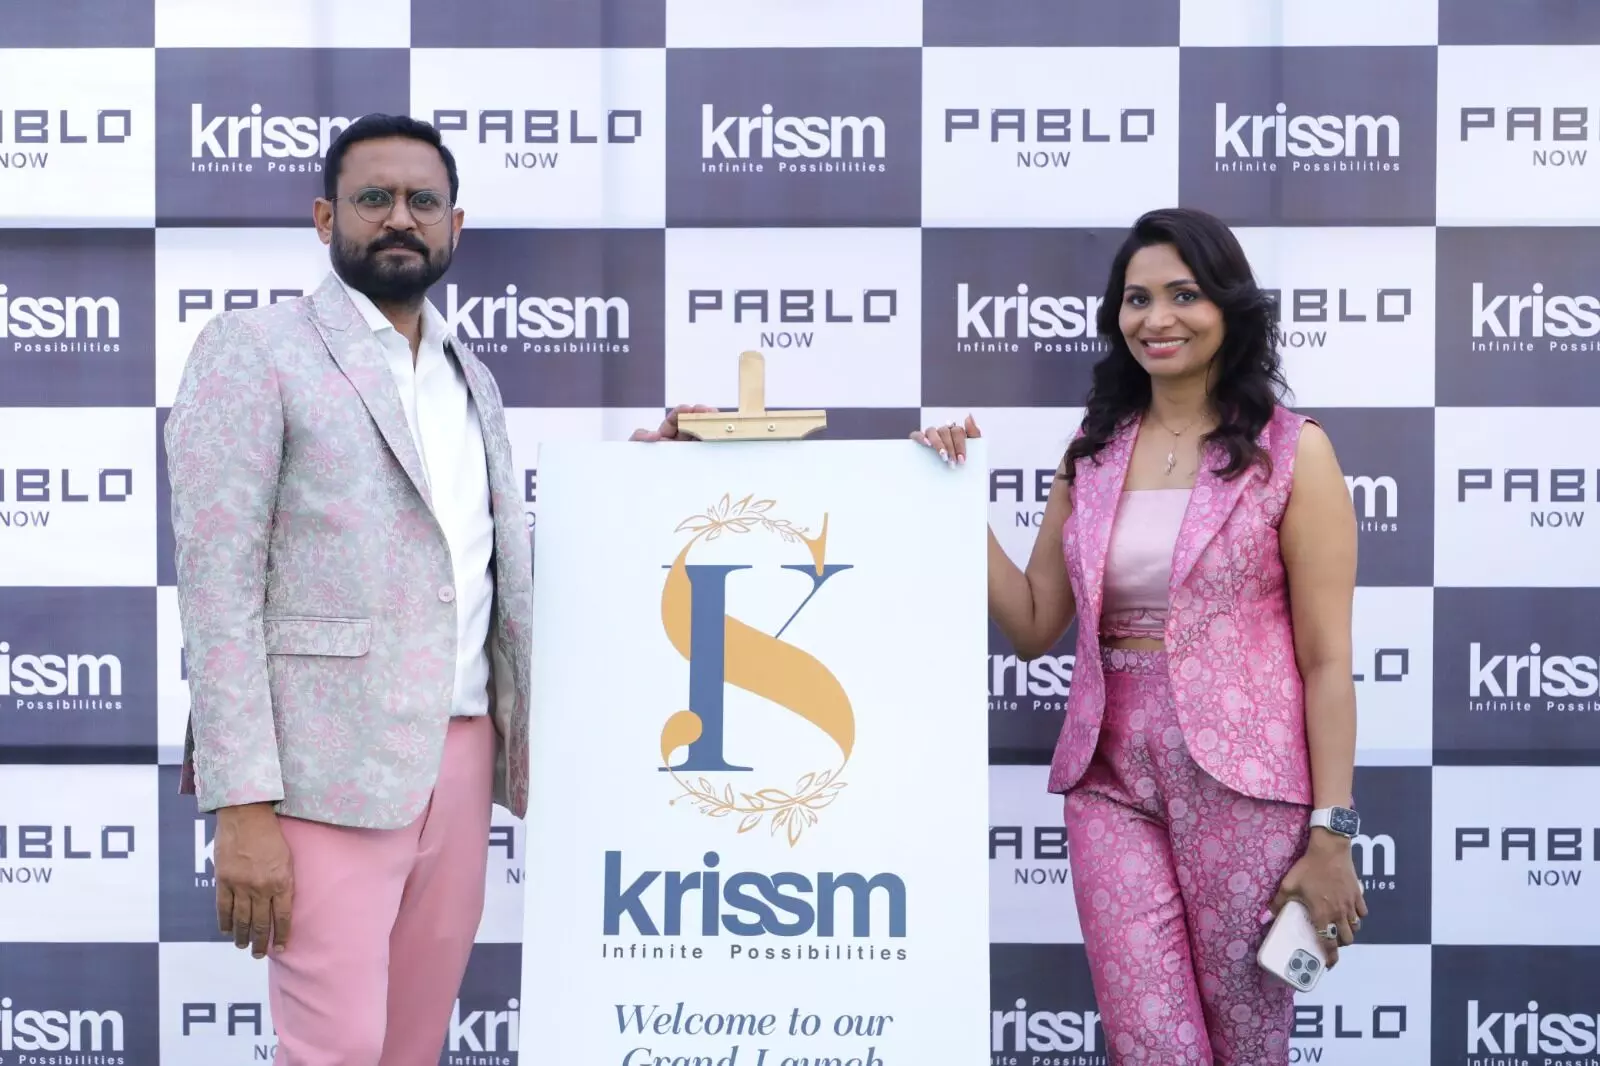 Krissm joins forces with PABLO to elevate luxury home furnishing in India